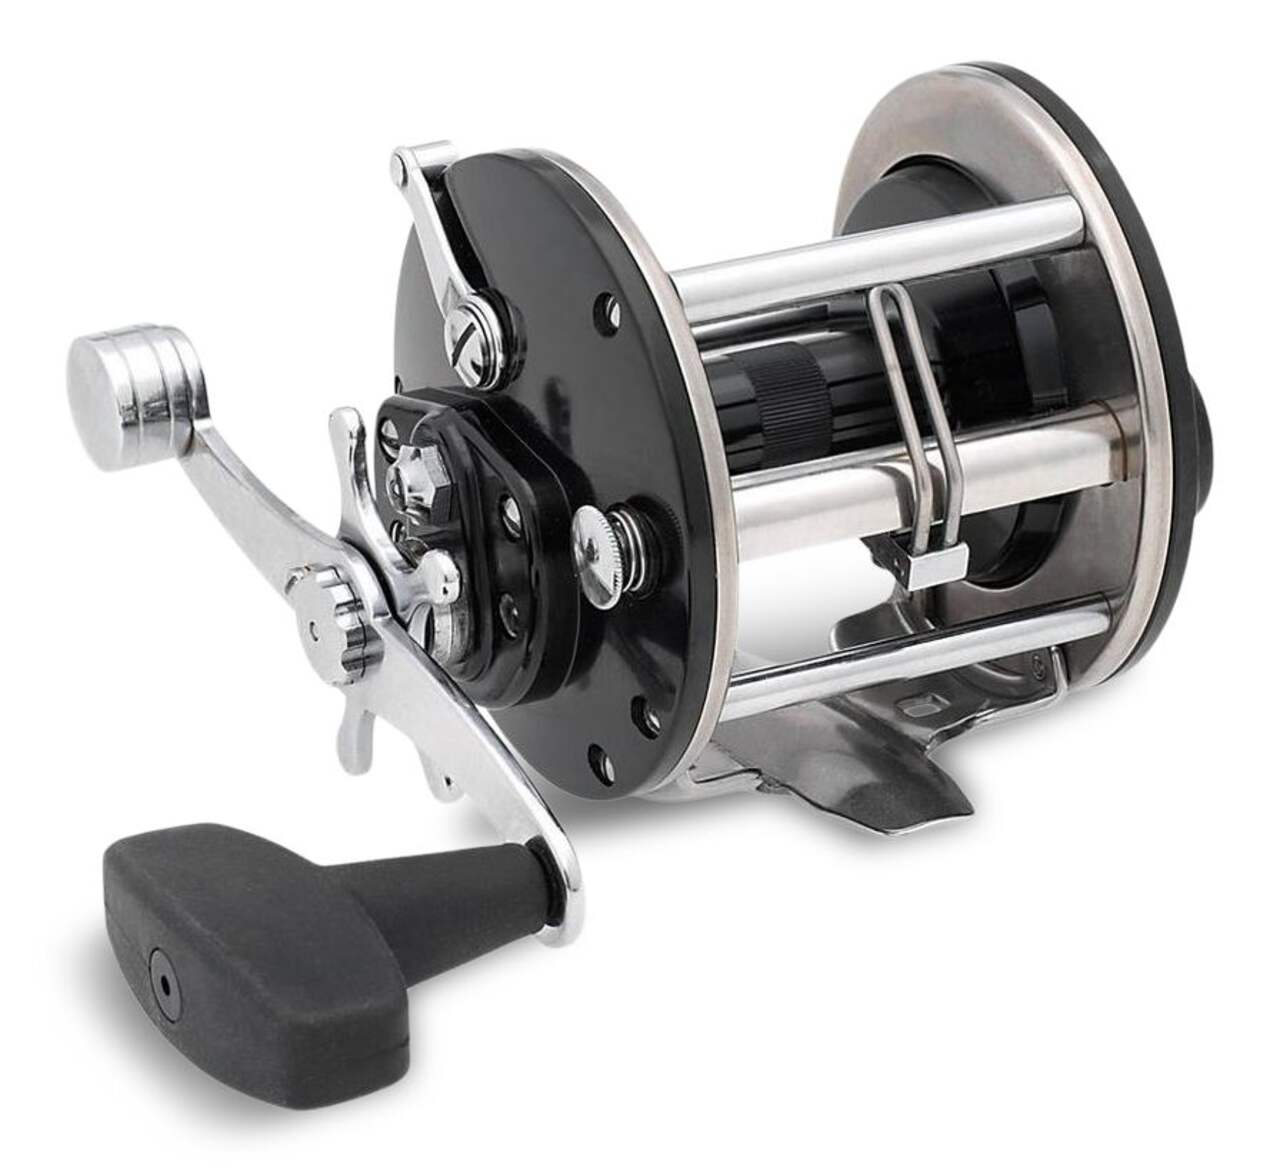 Penn 209 Saltwater Trolling Fishing Reel, Right Hand, Assorted Sizes